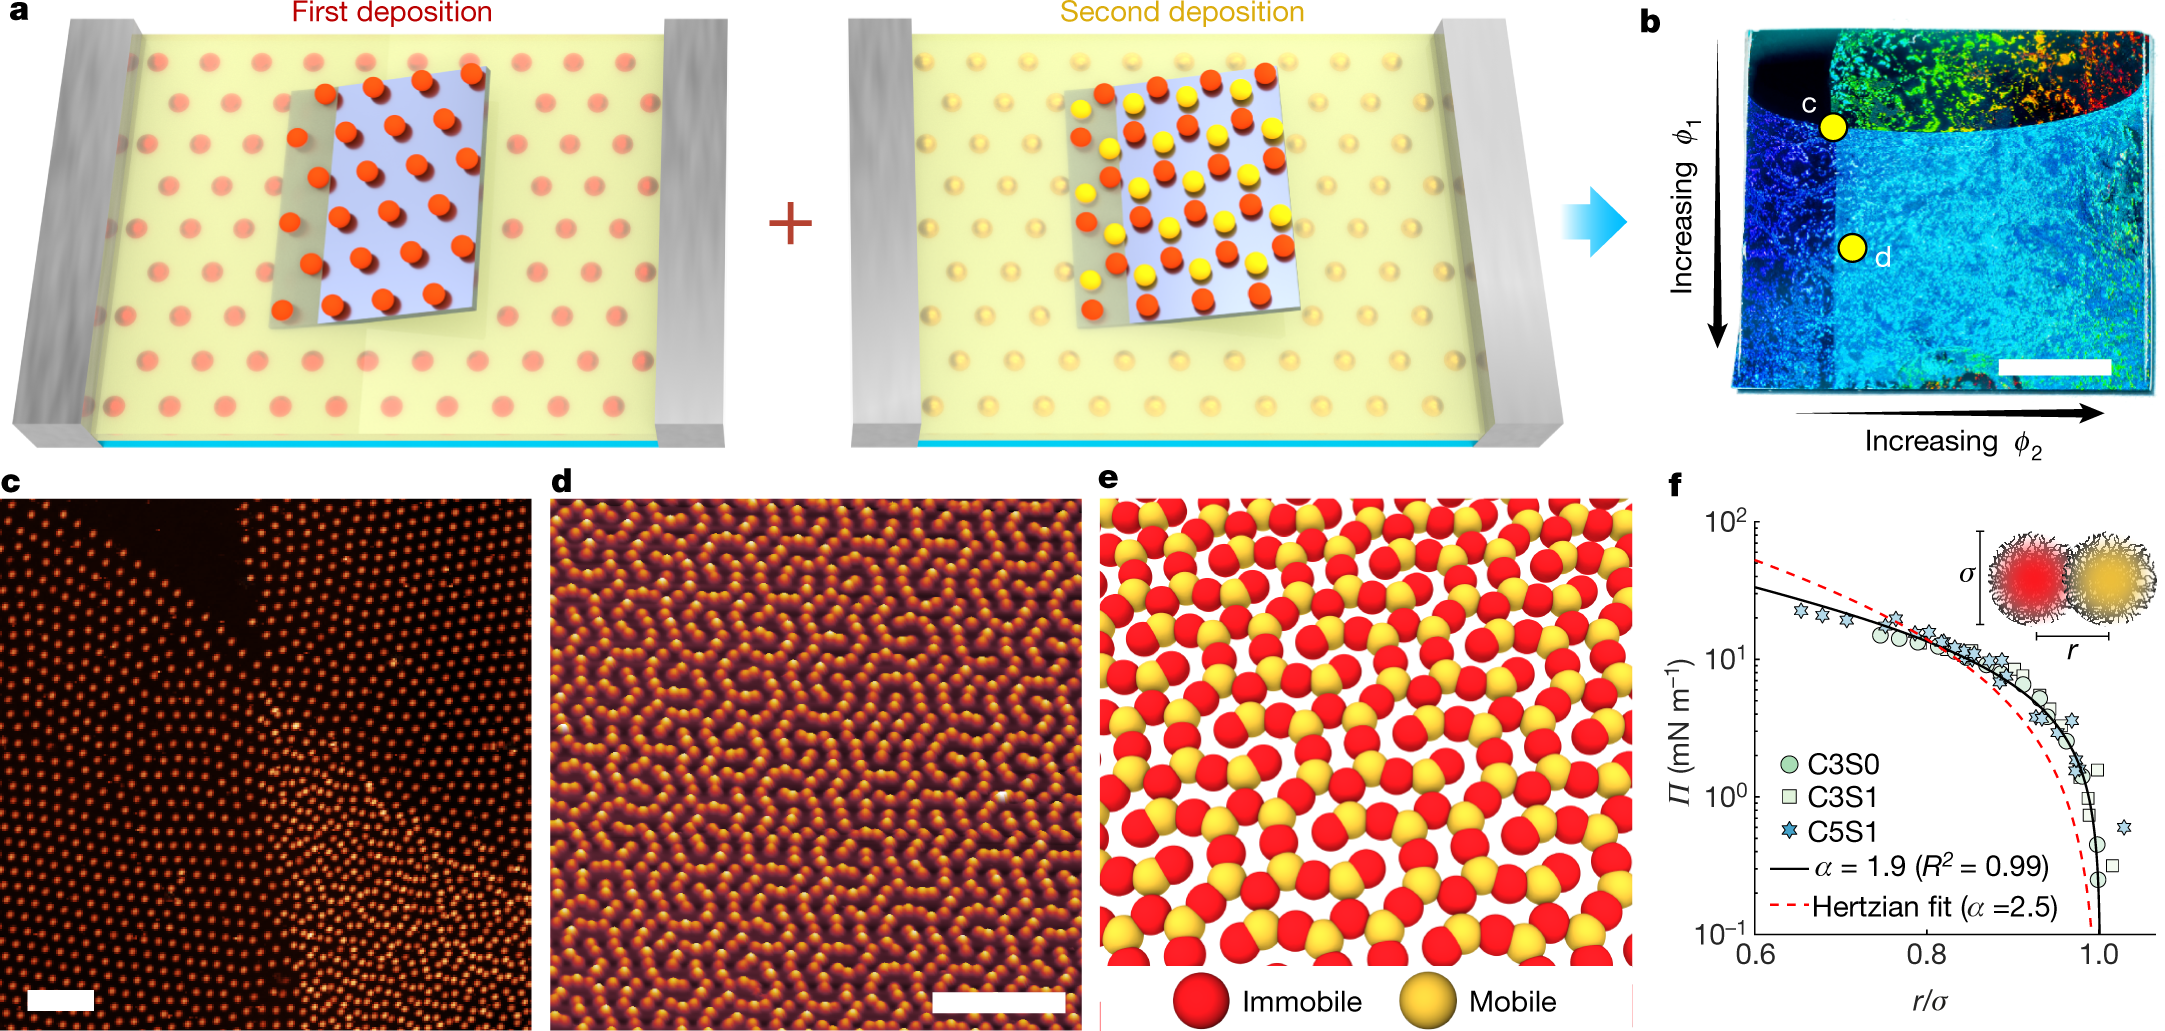 Self-templating assembly of soft microparticles into complex tessellations  | Nature